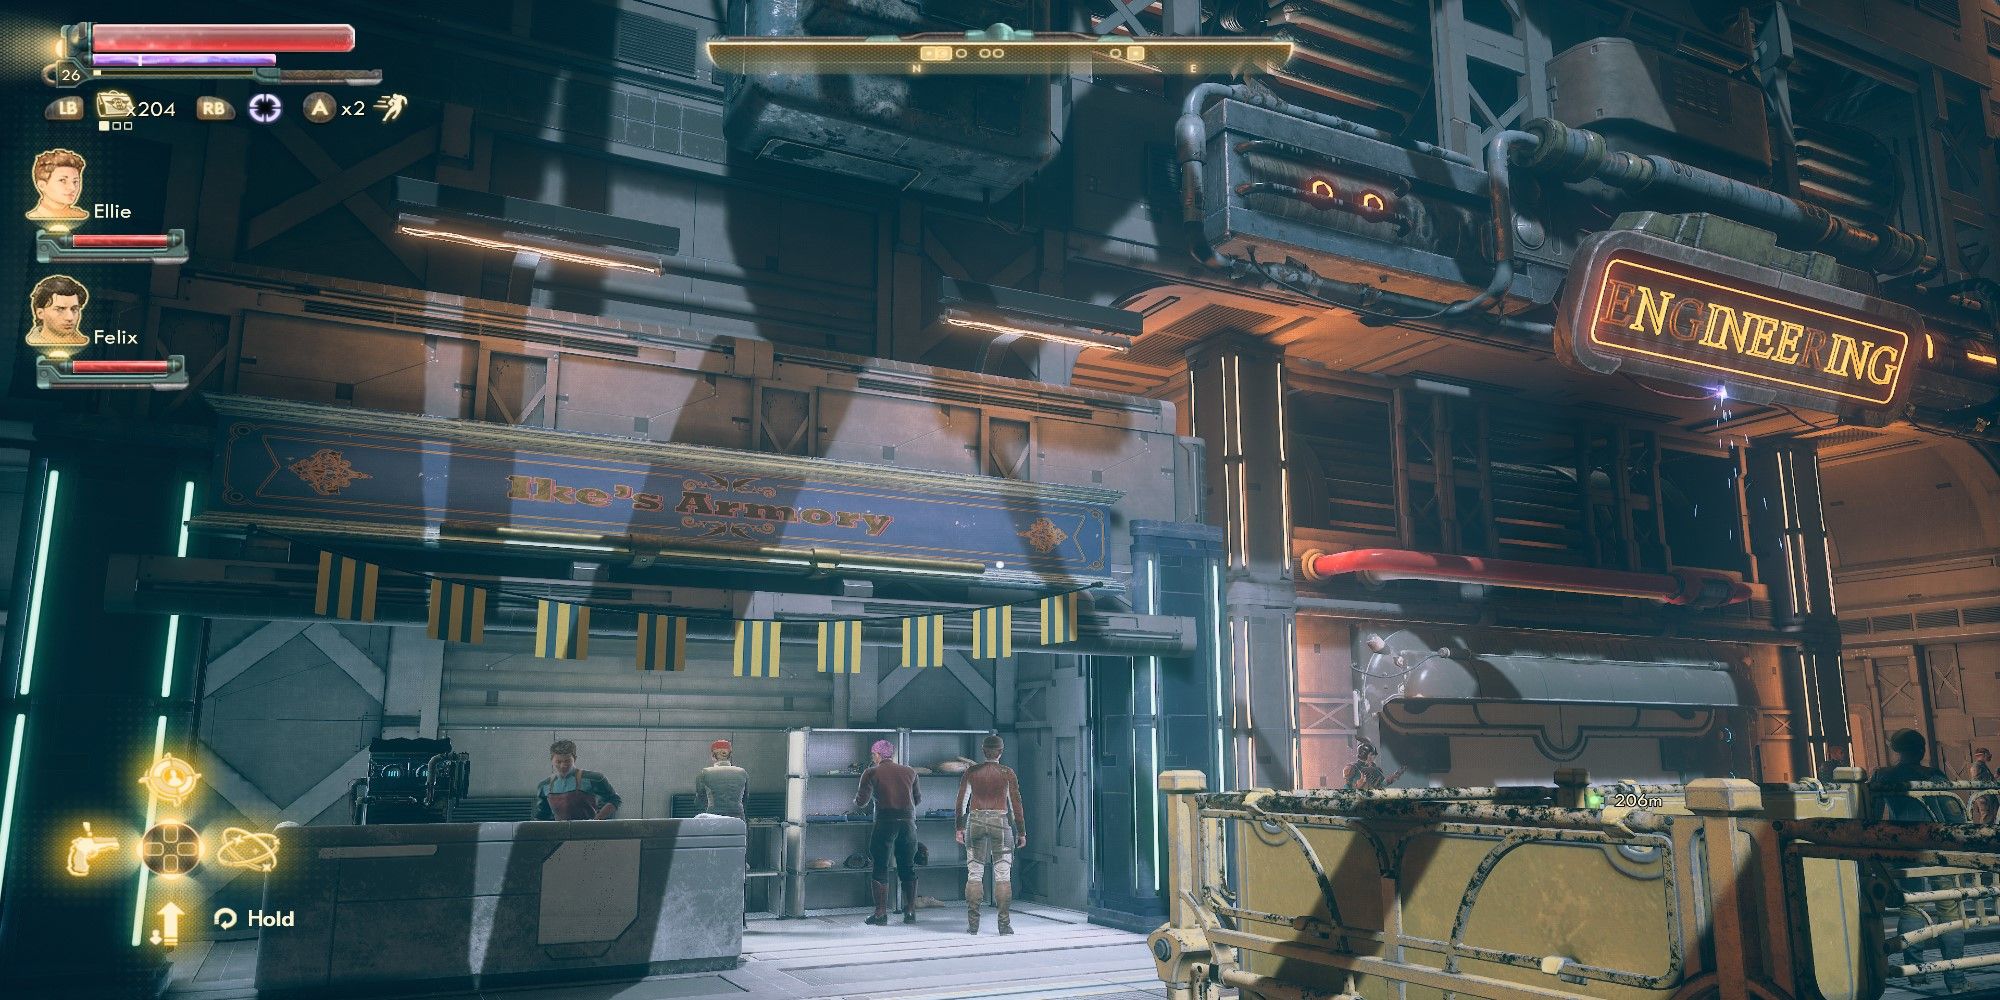 The Outer Worlds Ike's Armory and Engineering signs on the Groundbreaker